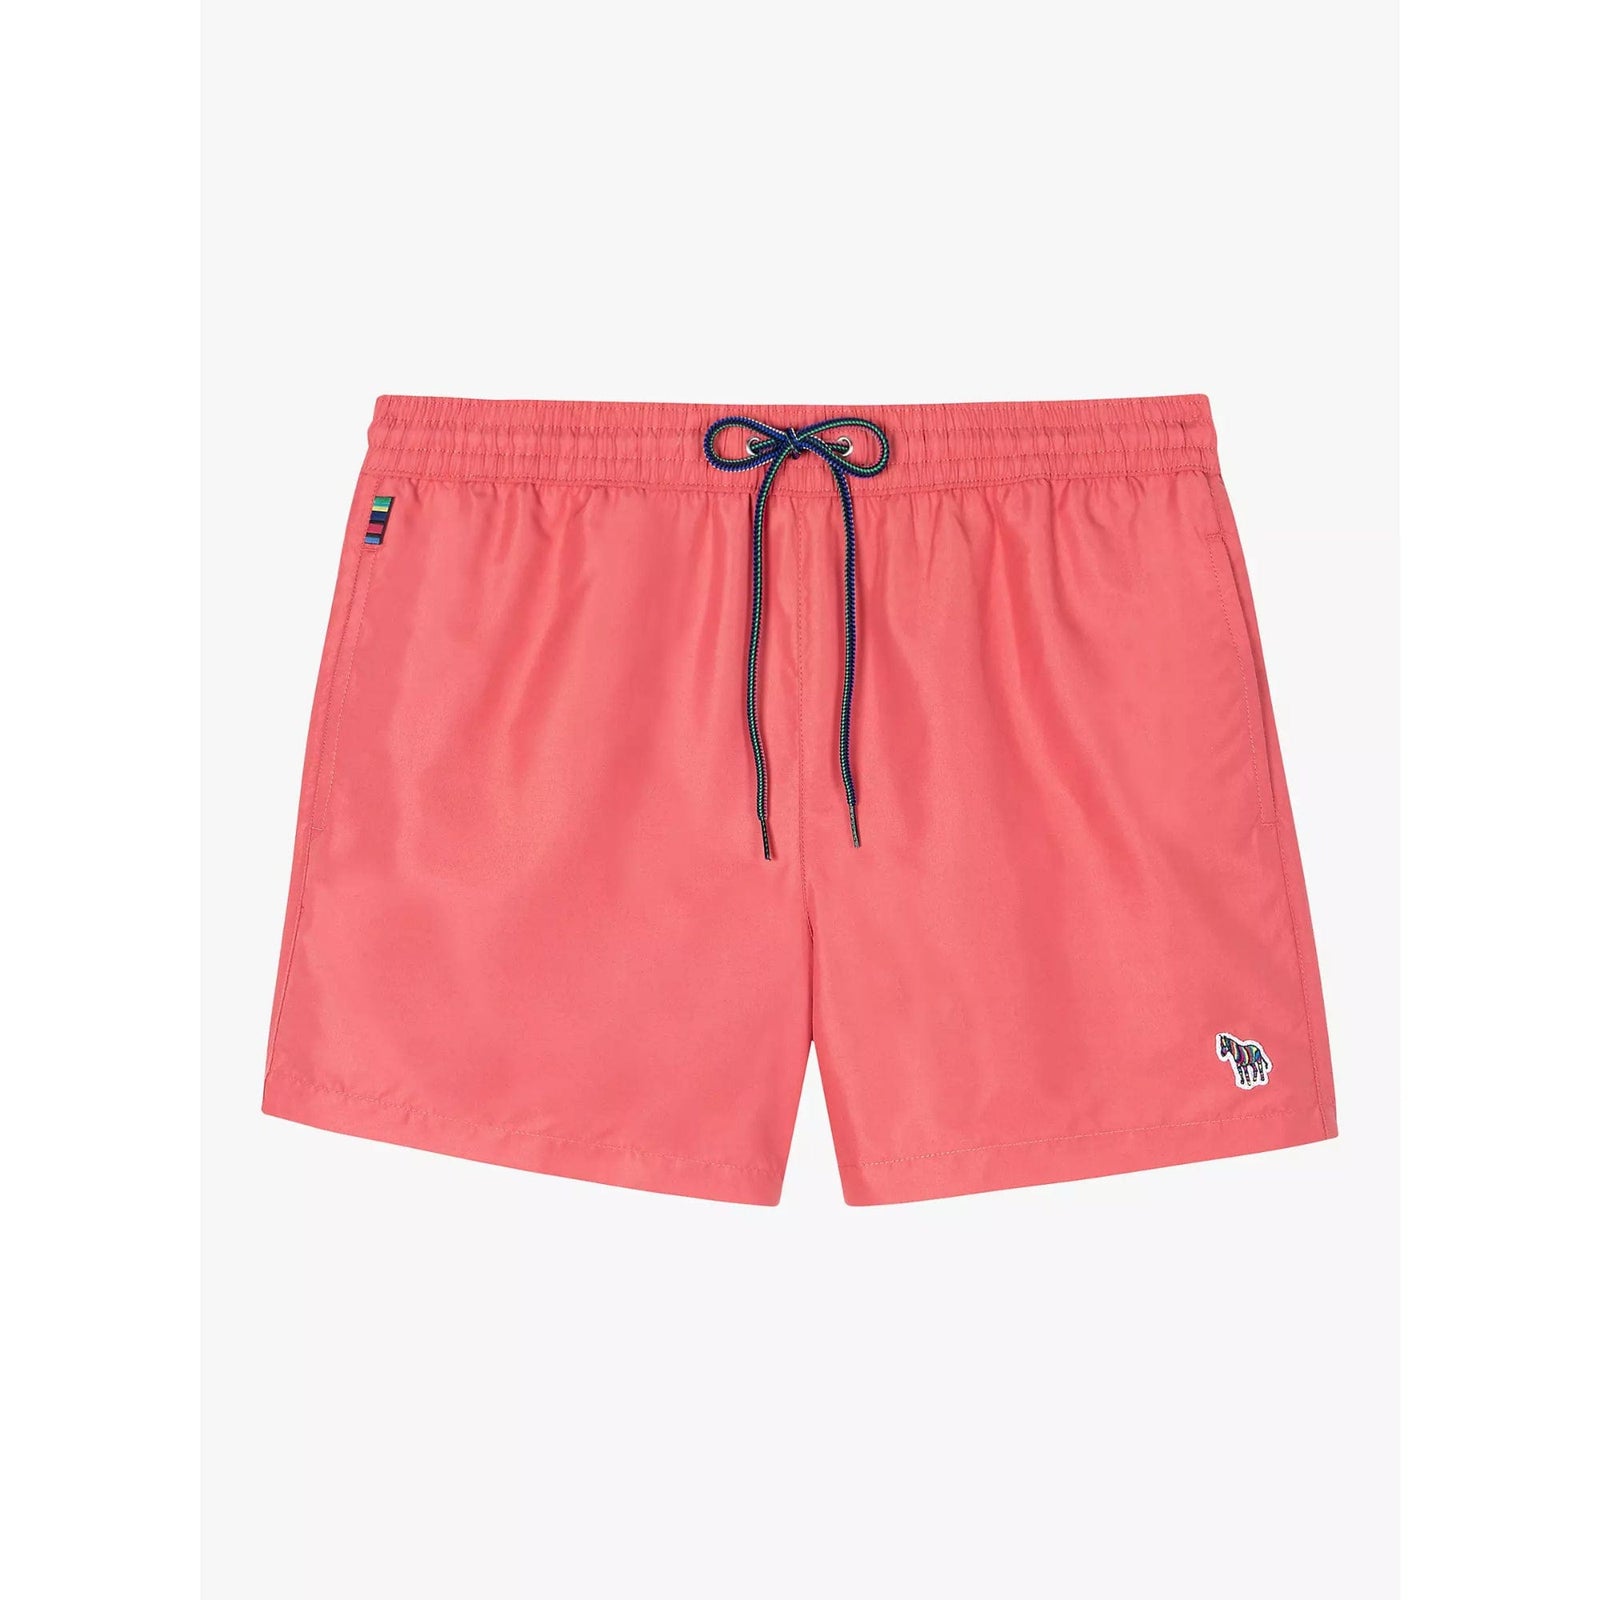 Paul Smith Zebra Logo Recycled Polyester Swim Shorts in Teal